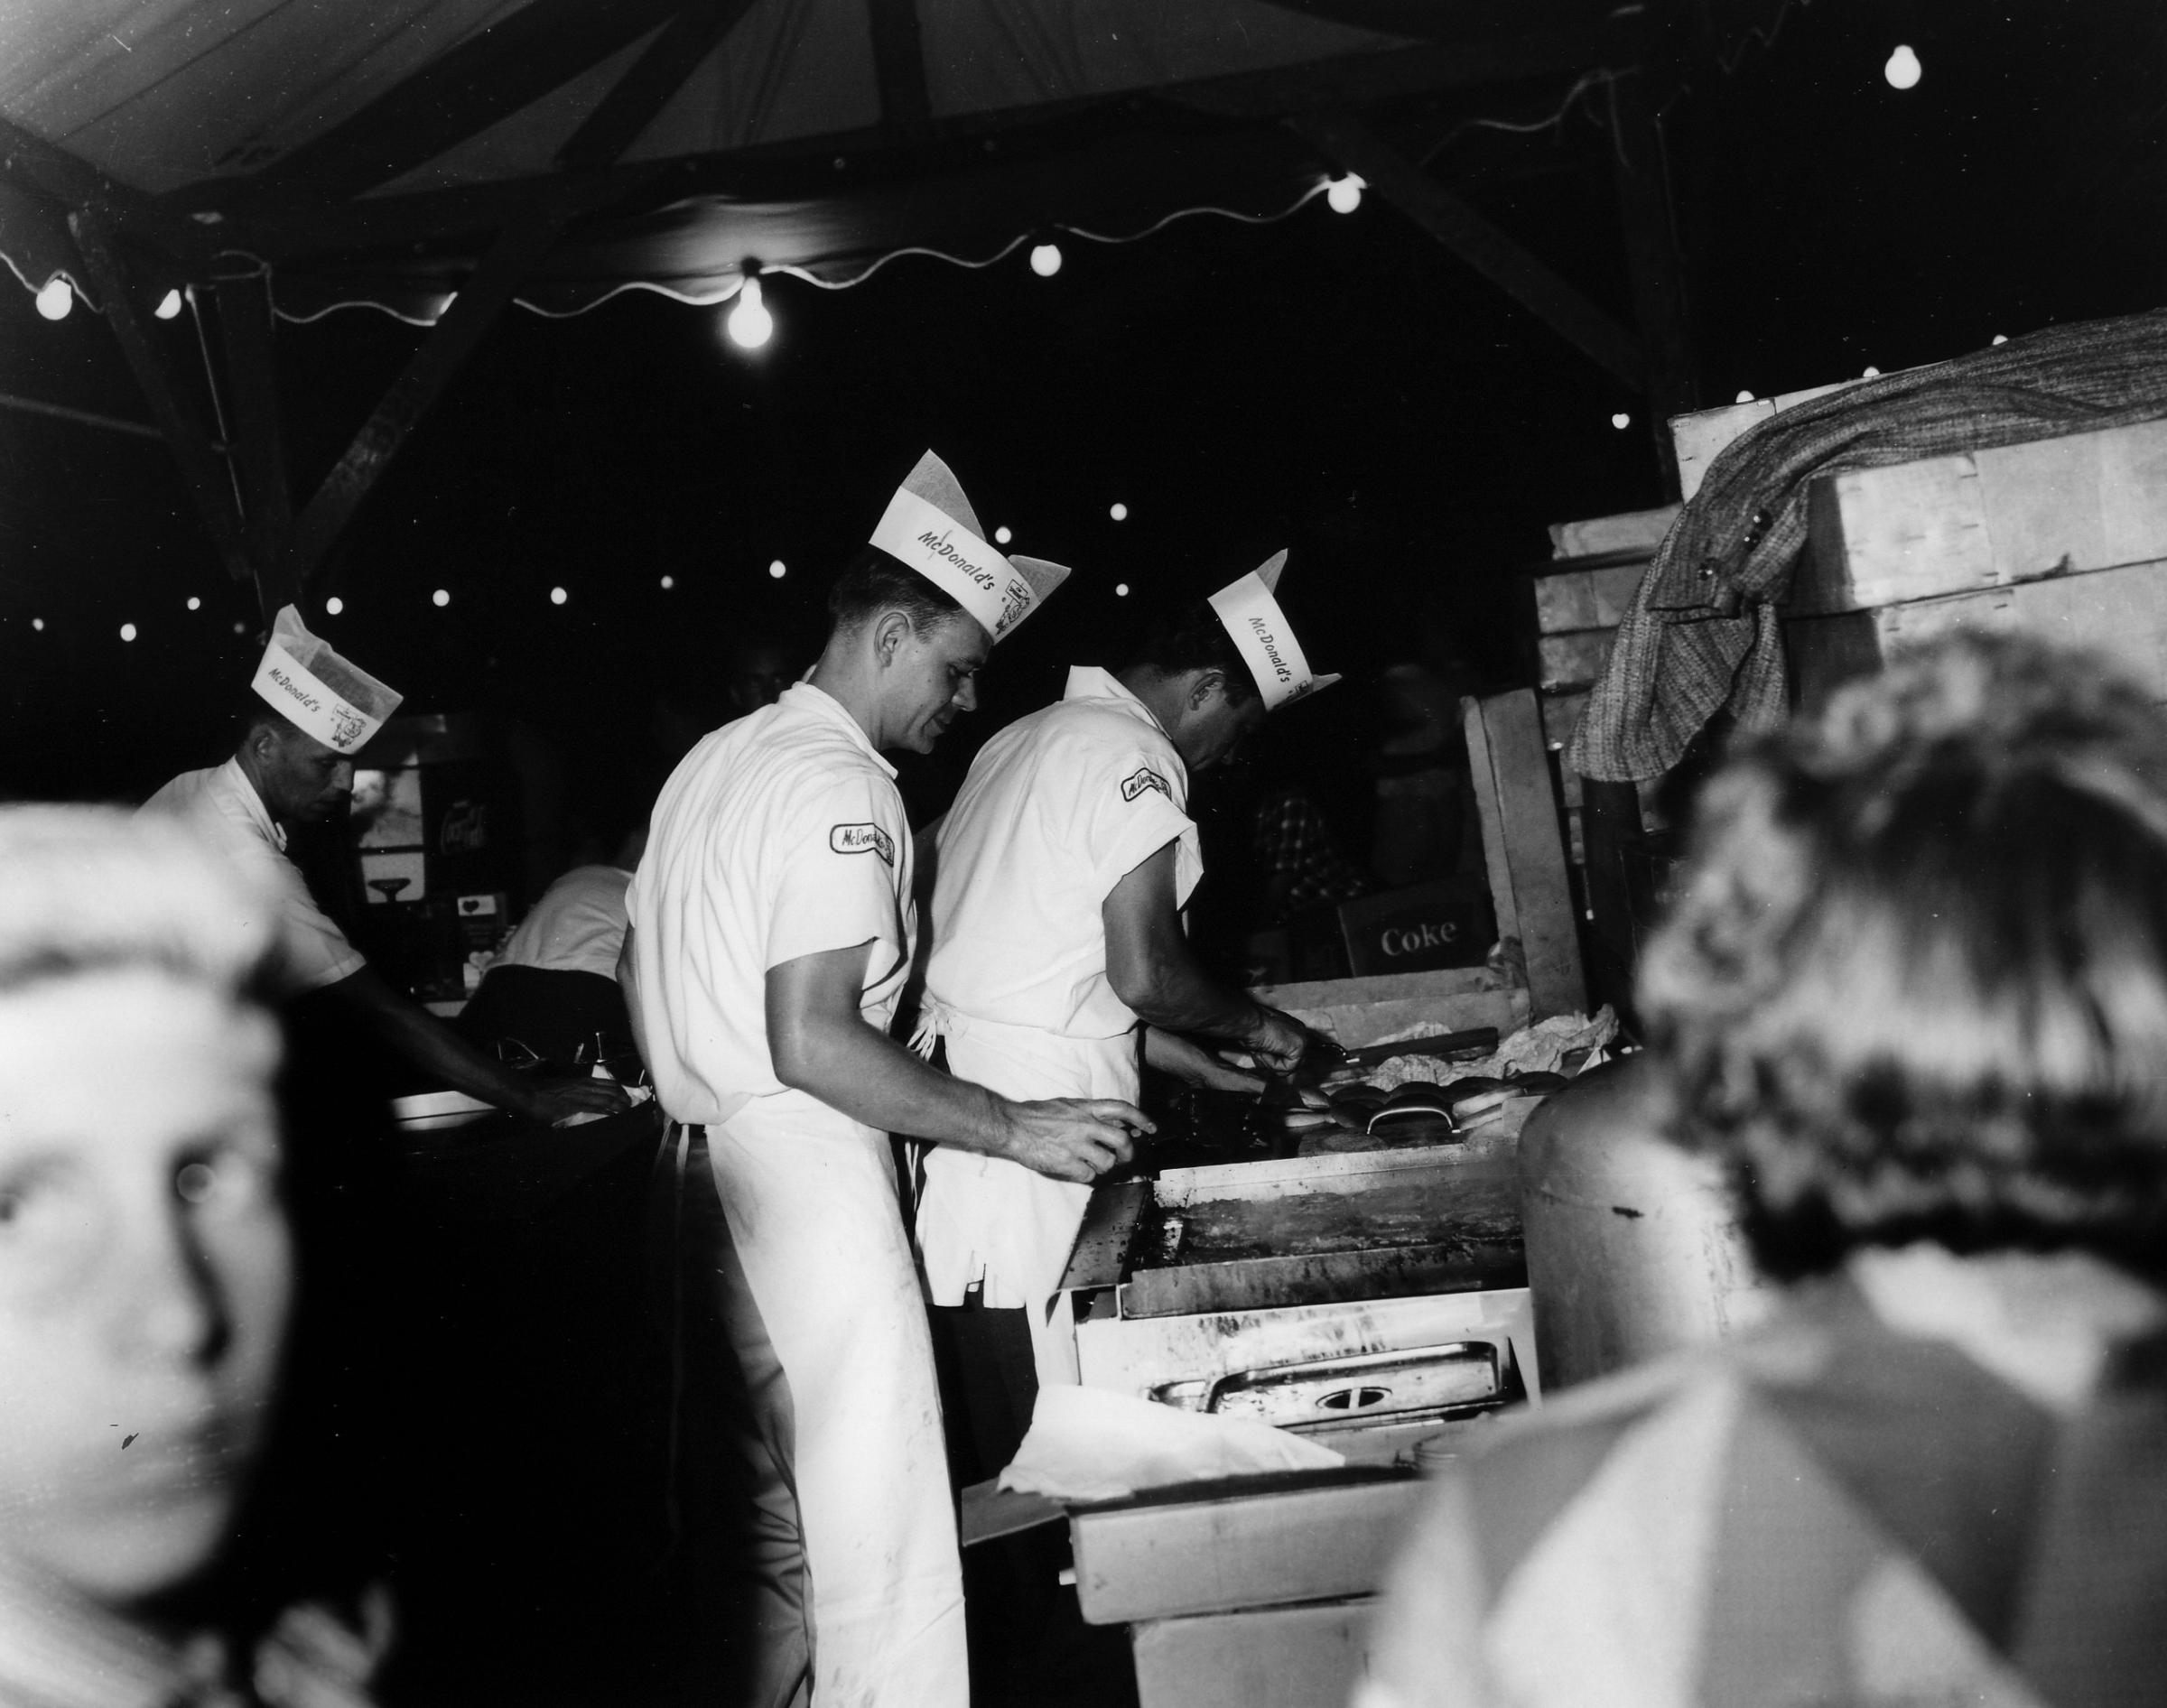 Future McDonald's Chairman, Fred Turner, at the Grill in 1956.